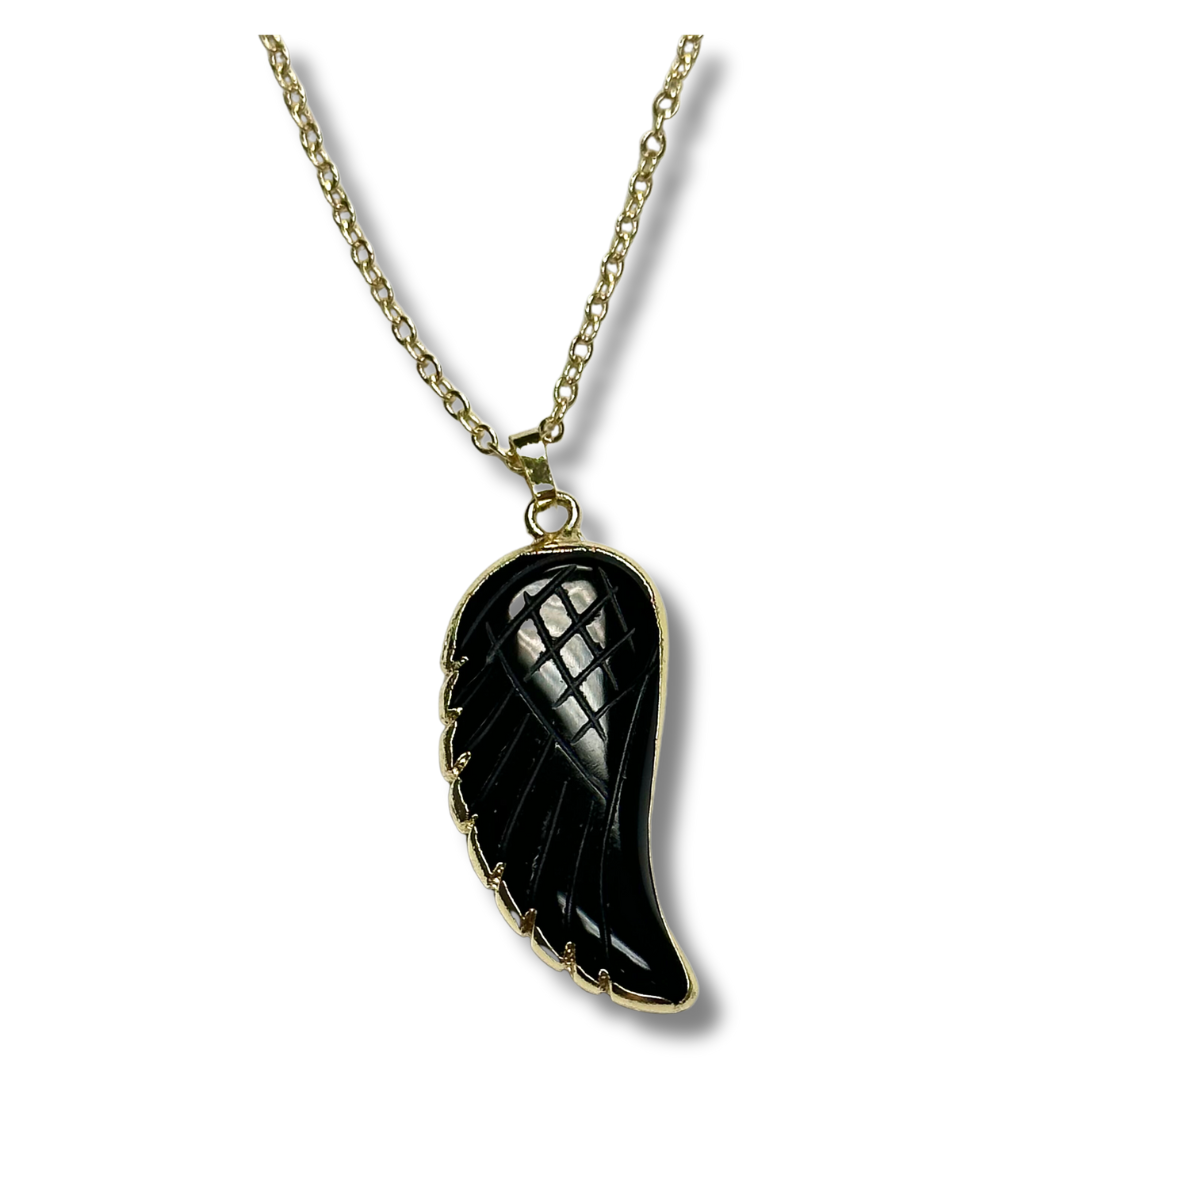 Black Obsidian Angel Wing Necklace - Gold Plated for Protection and Grounding